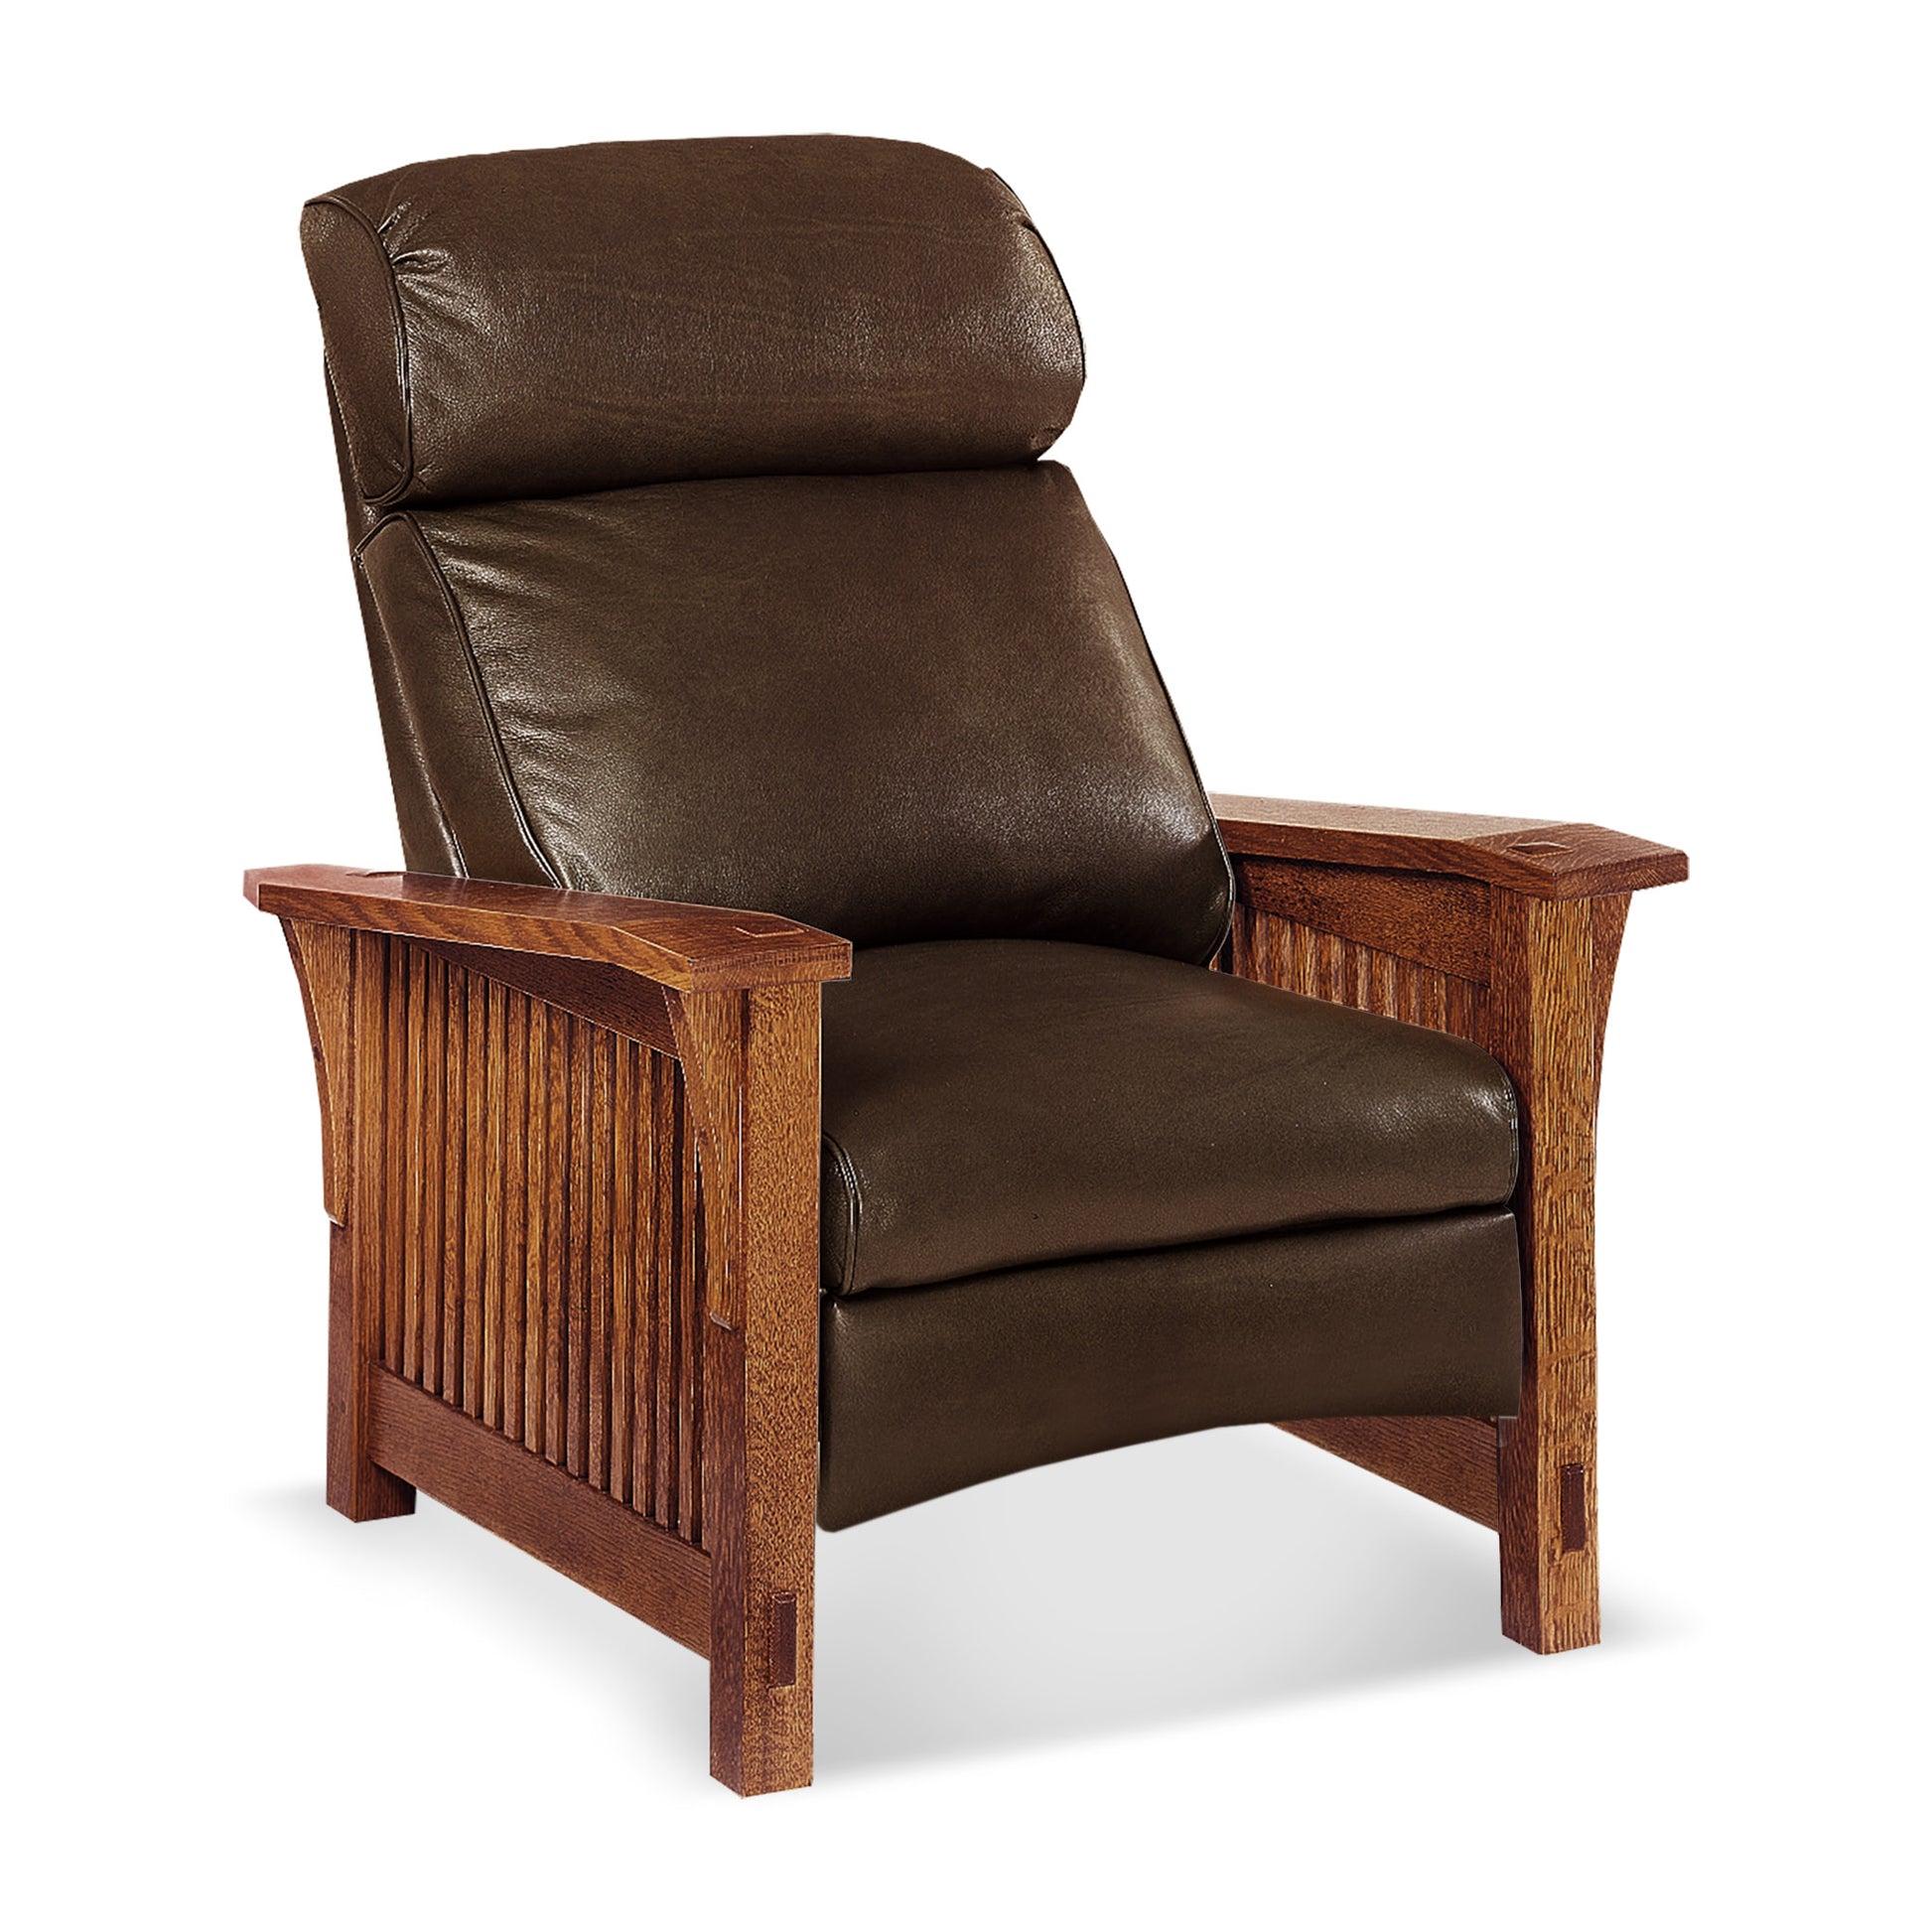 The Mission Bustle Back Recliners - Stickley Furniture | Mattress